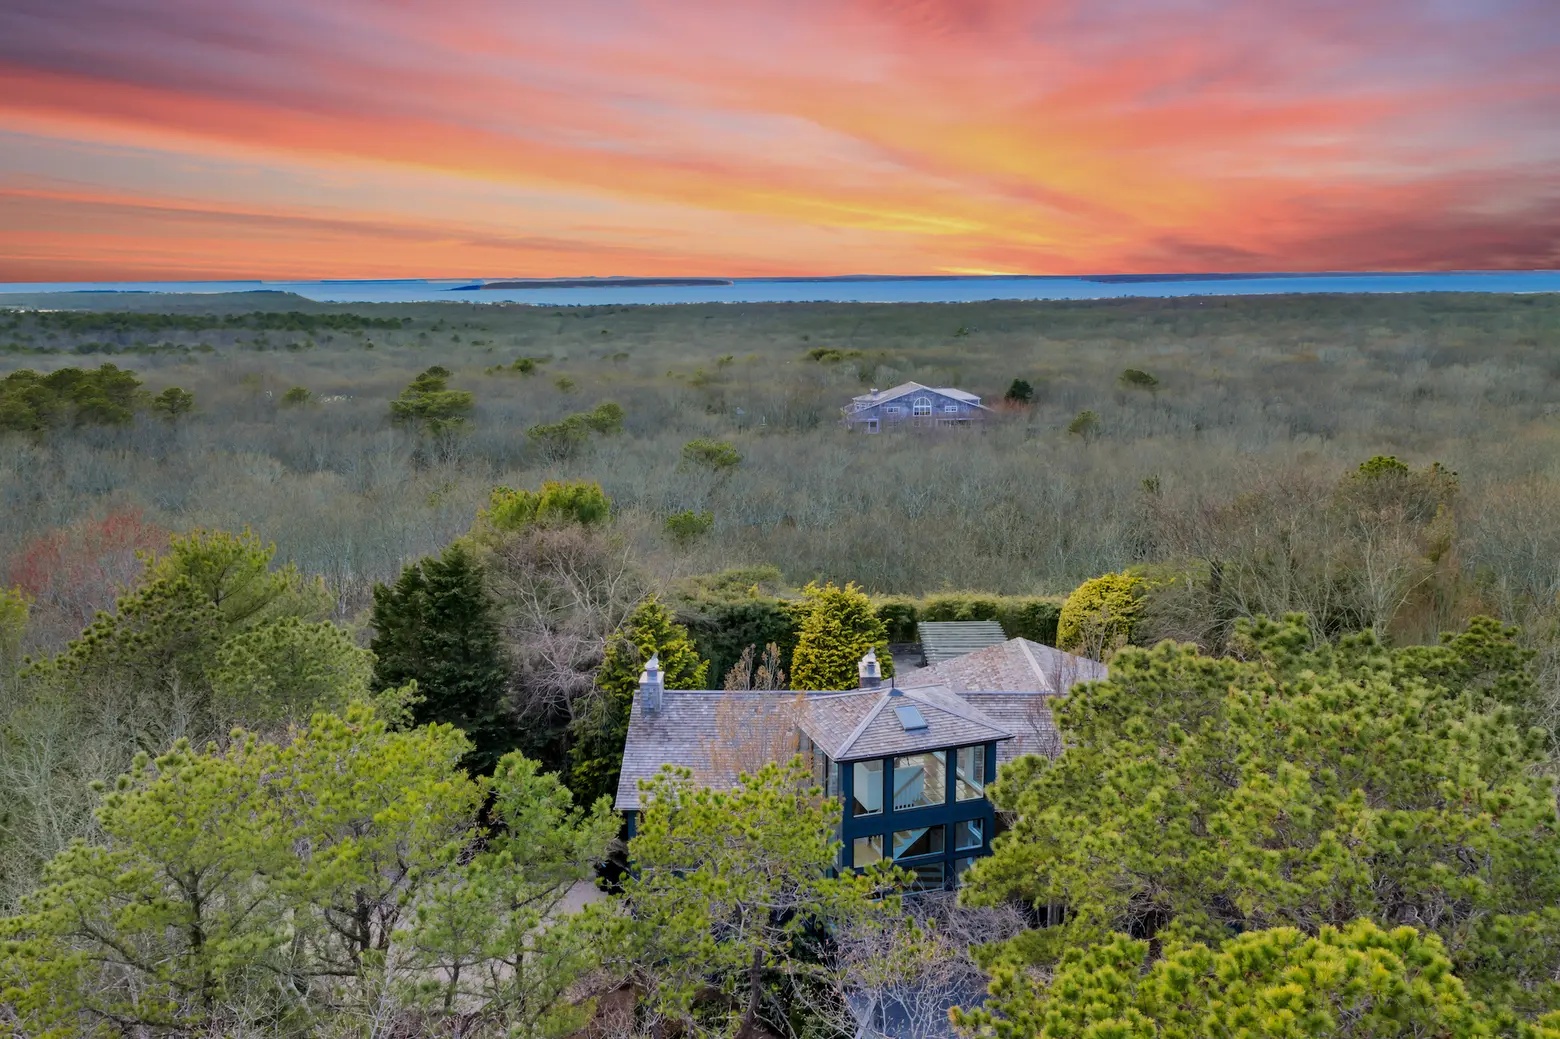 With panoramic views and rooftop observatory, this $4M Hamptons home resembles a lighthouse